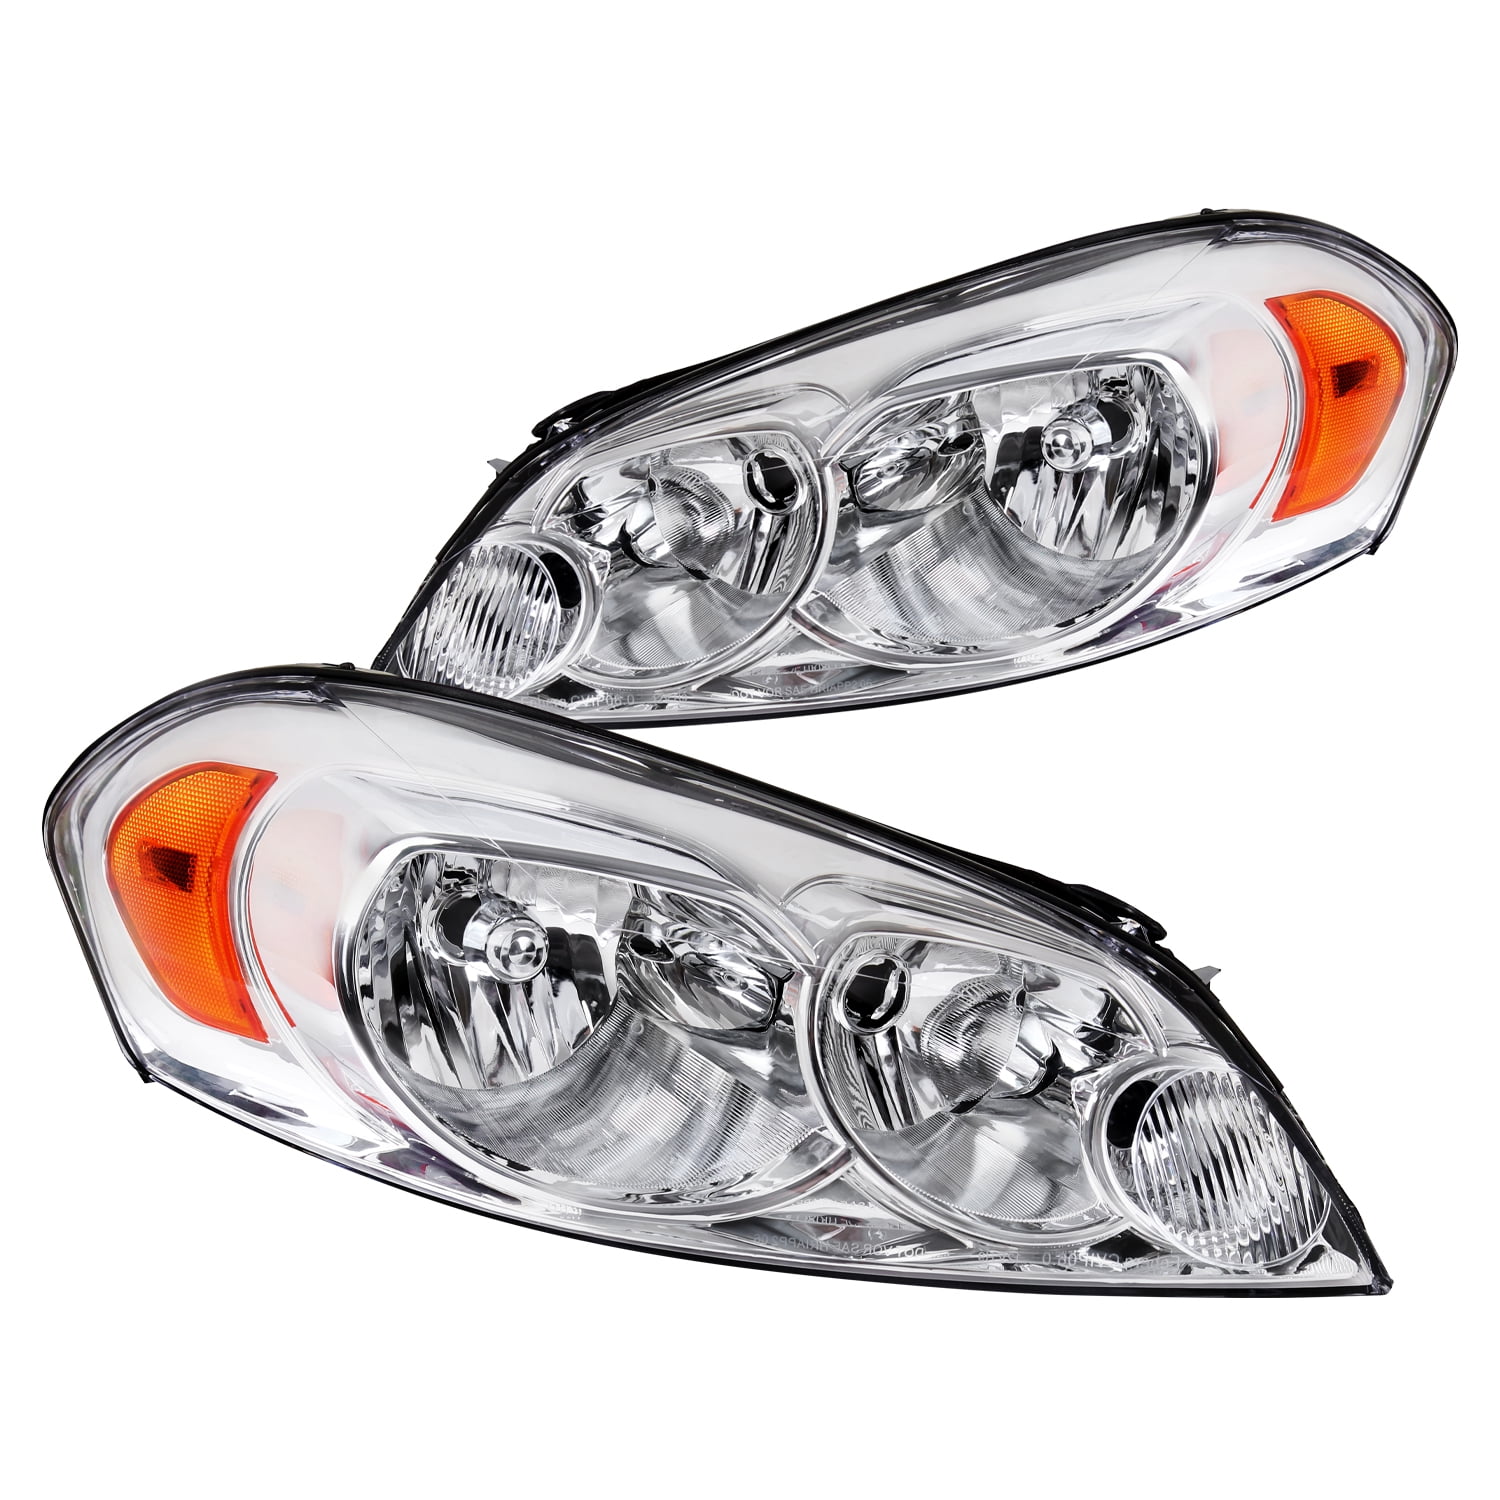 For Chevy Monte Carlo Headlight 1995 96 97 98 1999 RH and LH Side Pair Halogen